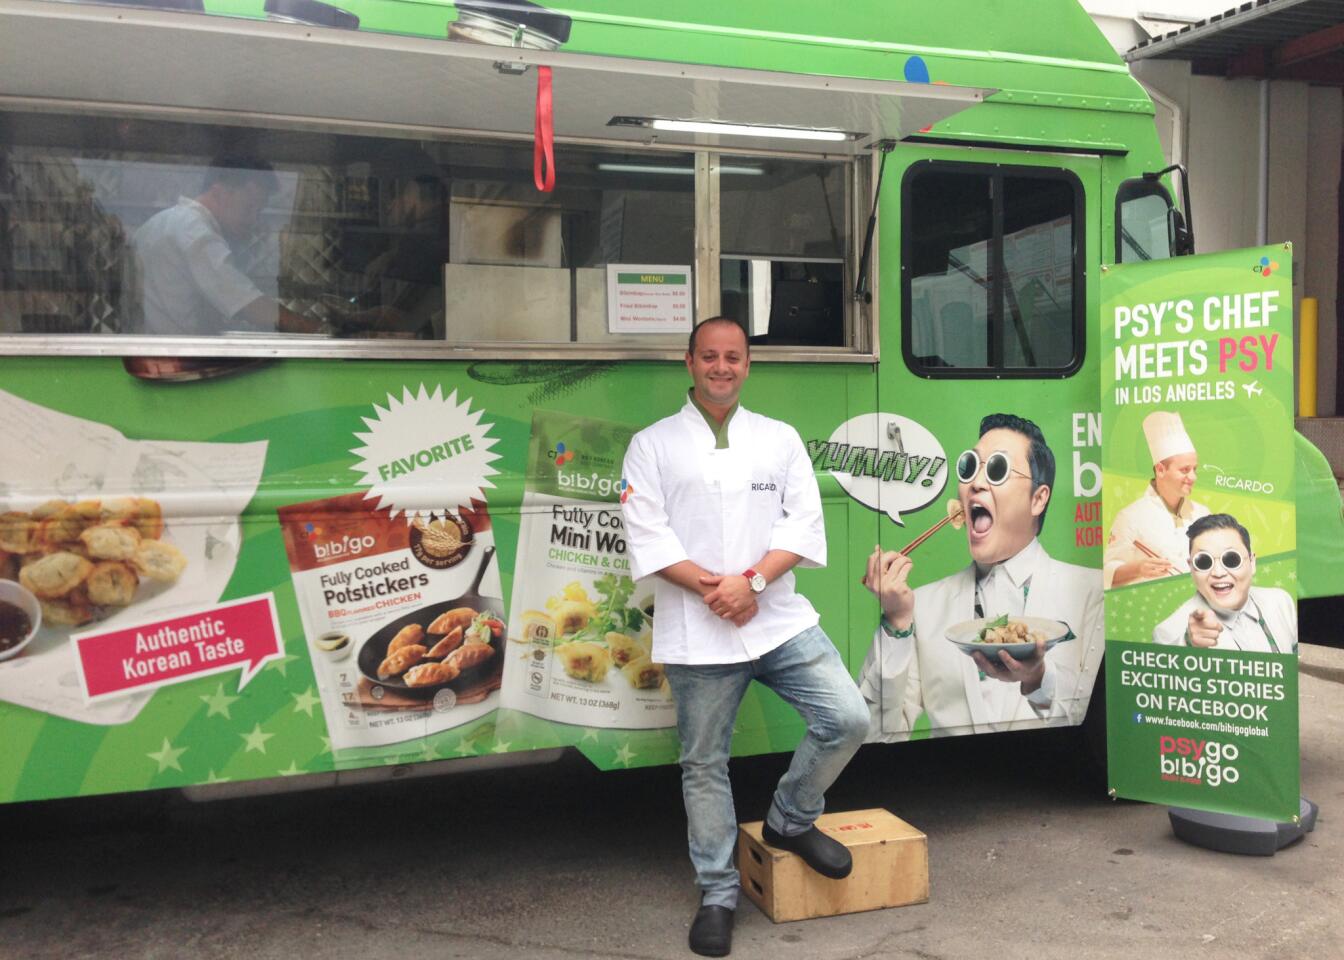 Ricardo Caput, winner of Psy's personal chef contest, stands in front of the food truck.